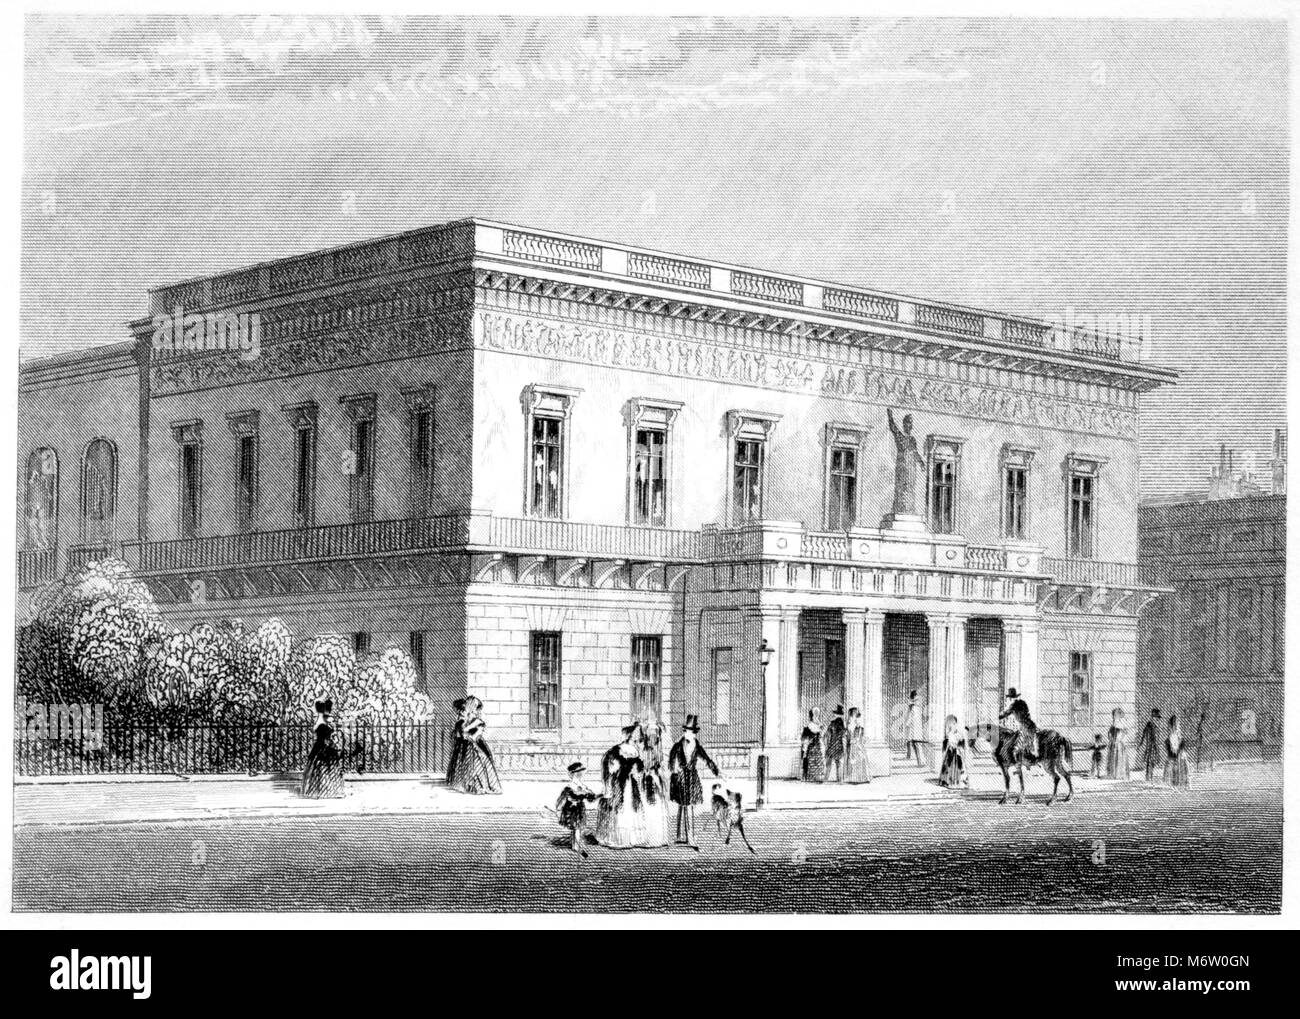 An engraving of The New Atheneum (Athenaeum Club) Waterloo Place, Pall Mall, London scanned at high resolution from a book printed in 1851. Stock Photo